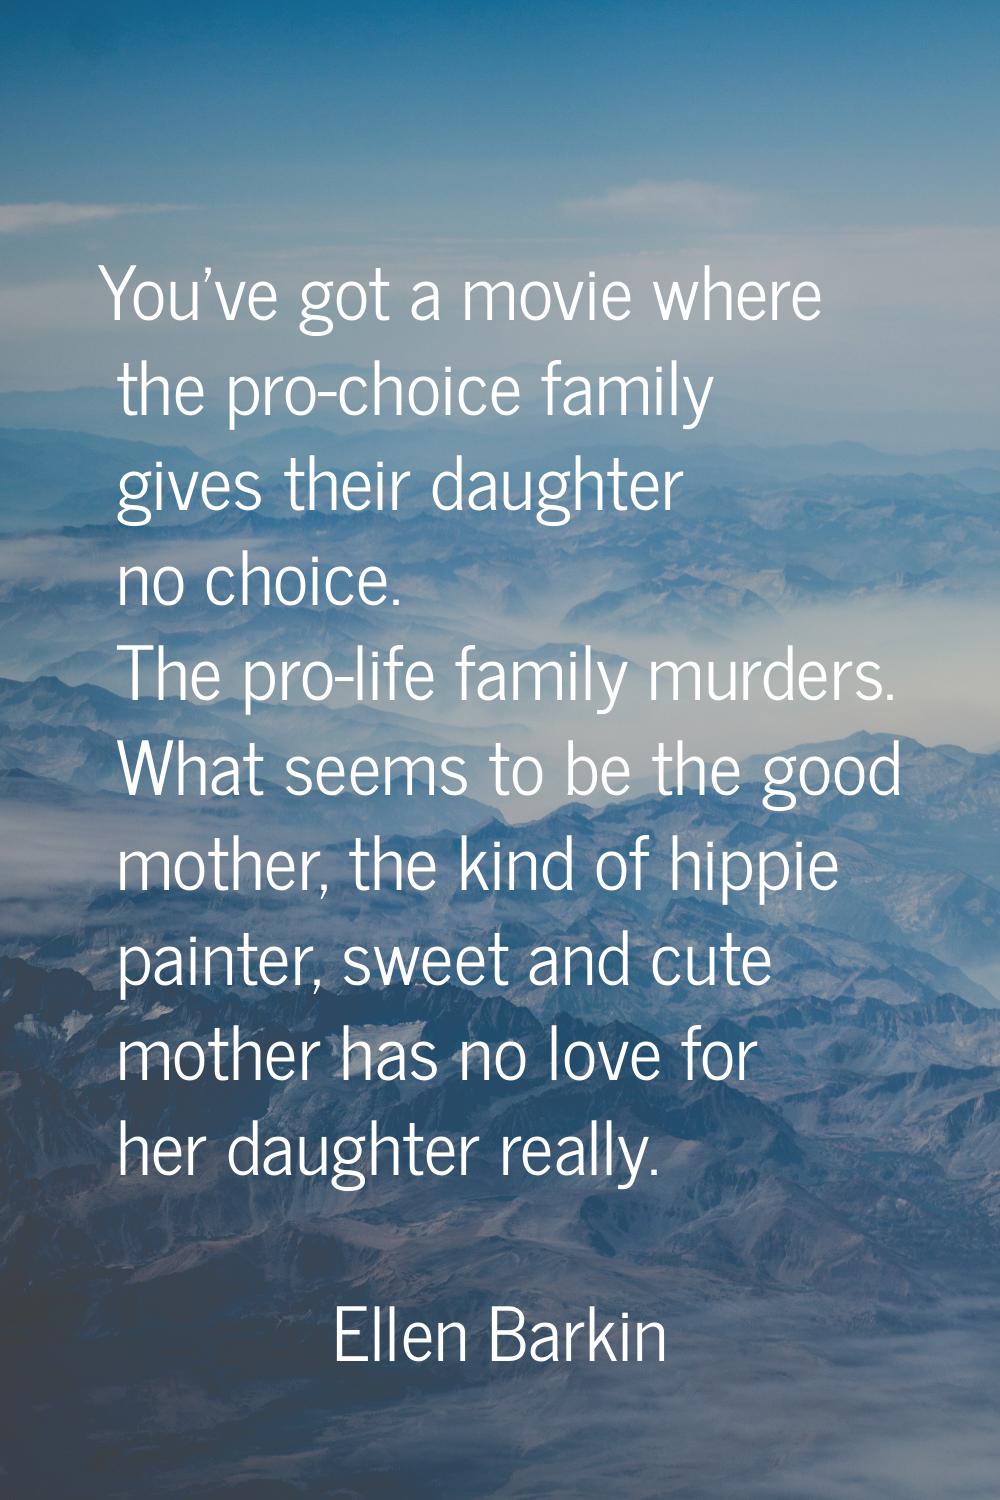 You've got a movie where the pro-choice family gives their daughter no choice. The pro-life family 